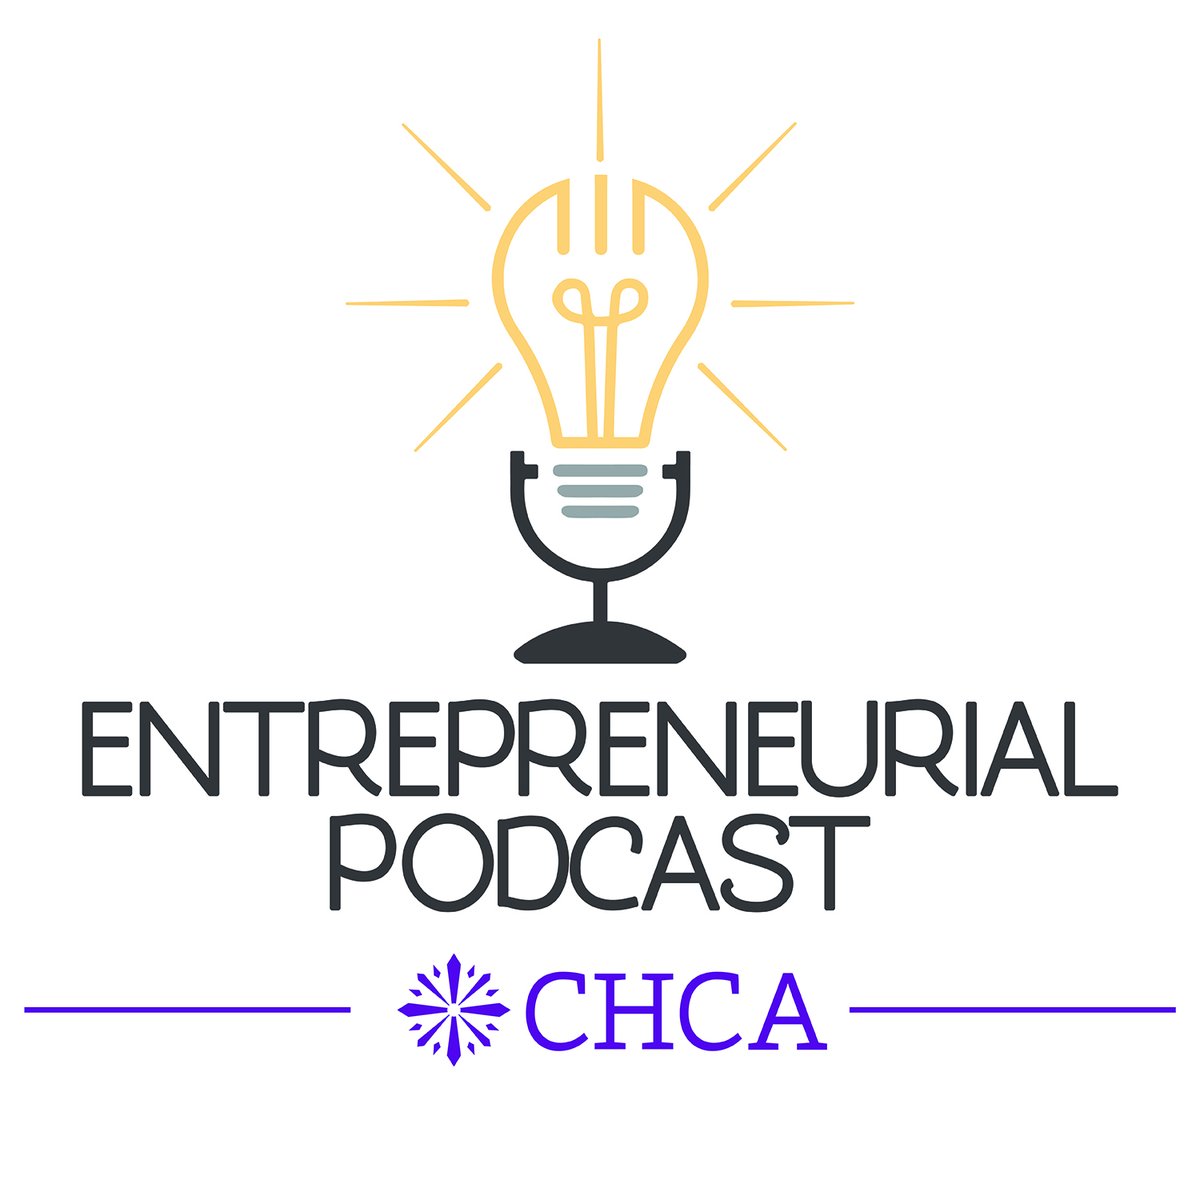 Need some good content for that spring break road trip? Check out the CHCA Entrepreneurial Podcast! Our latest episode discusses self-care, wellness, and meaningful reflection. Listen here or on your favorite podcast platform. buzzsprout.com/963703/14588249 #GoCHCA